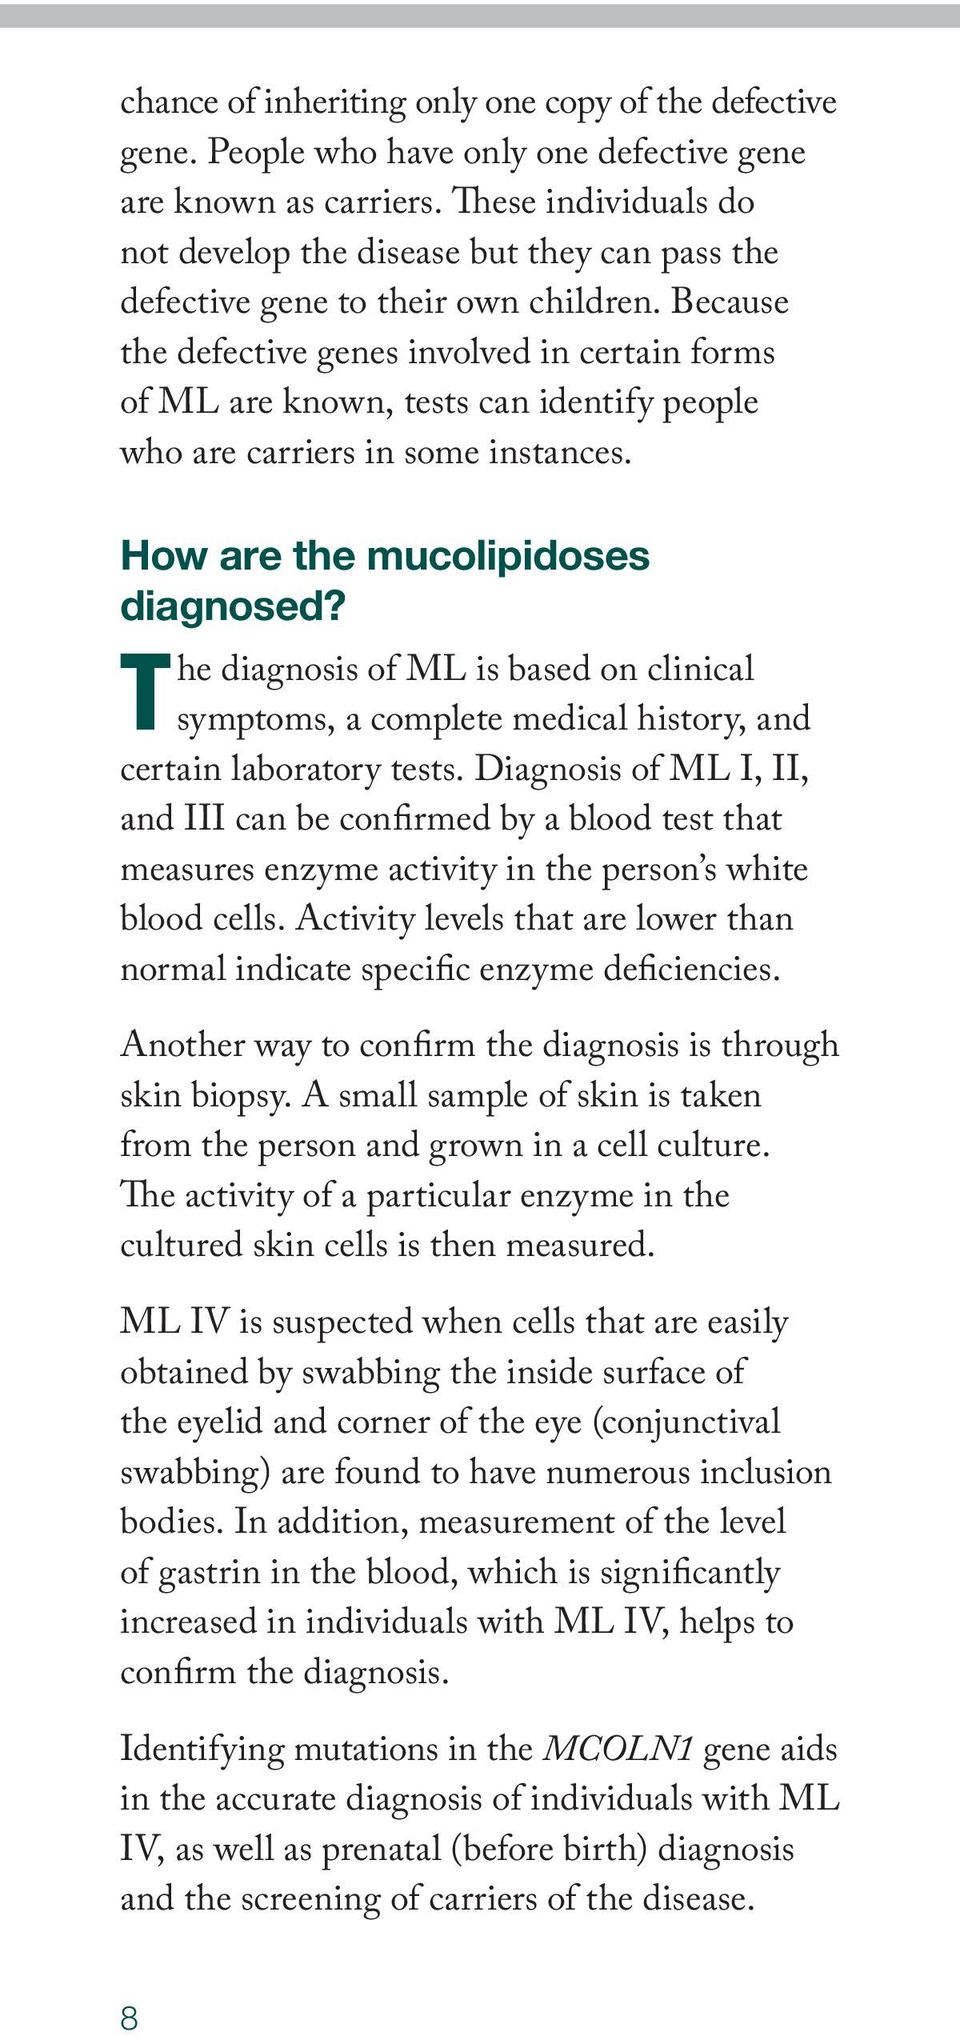 Because the defective genes involved in certain forms of ML are known, tests can identify people who are carriers in some instances. How are the mucolipidoses diagnosed?